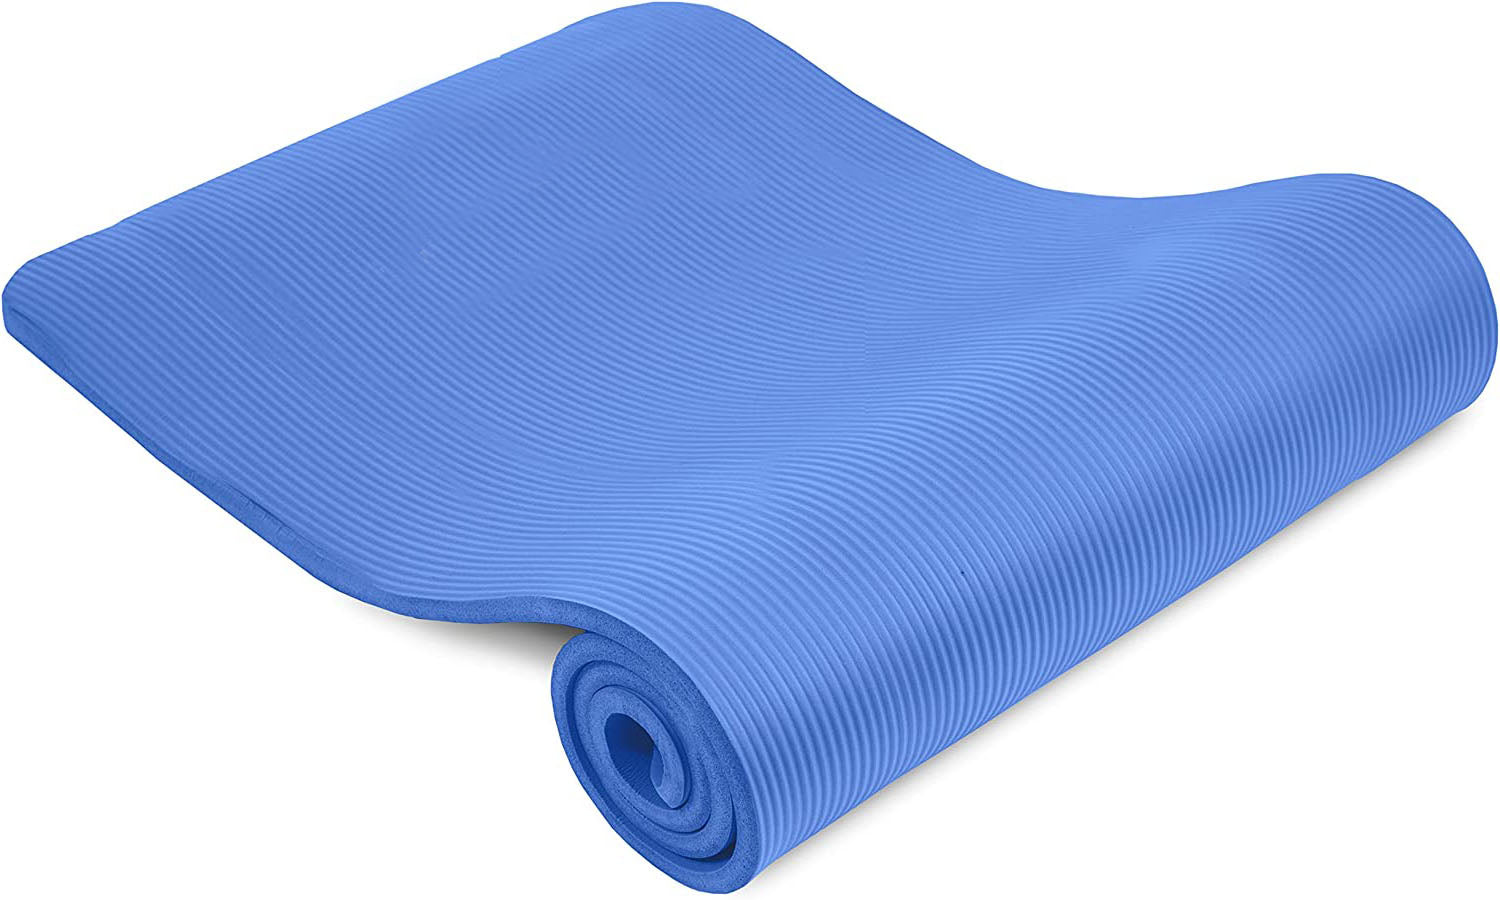 YOGA MAT 15mm Thick with Strap Roll Up Exercise Workout Gym